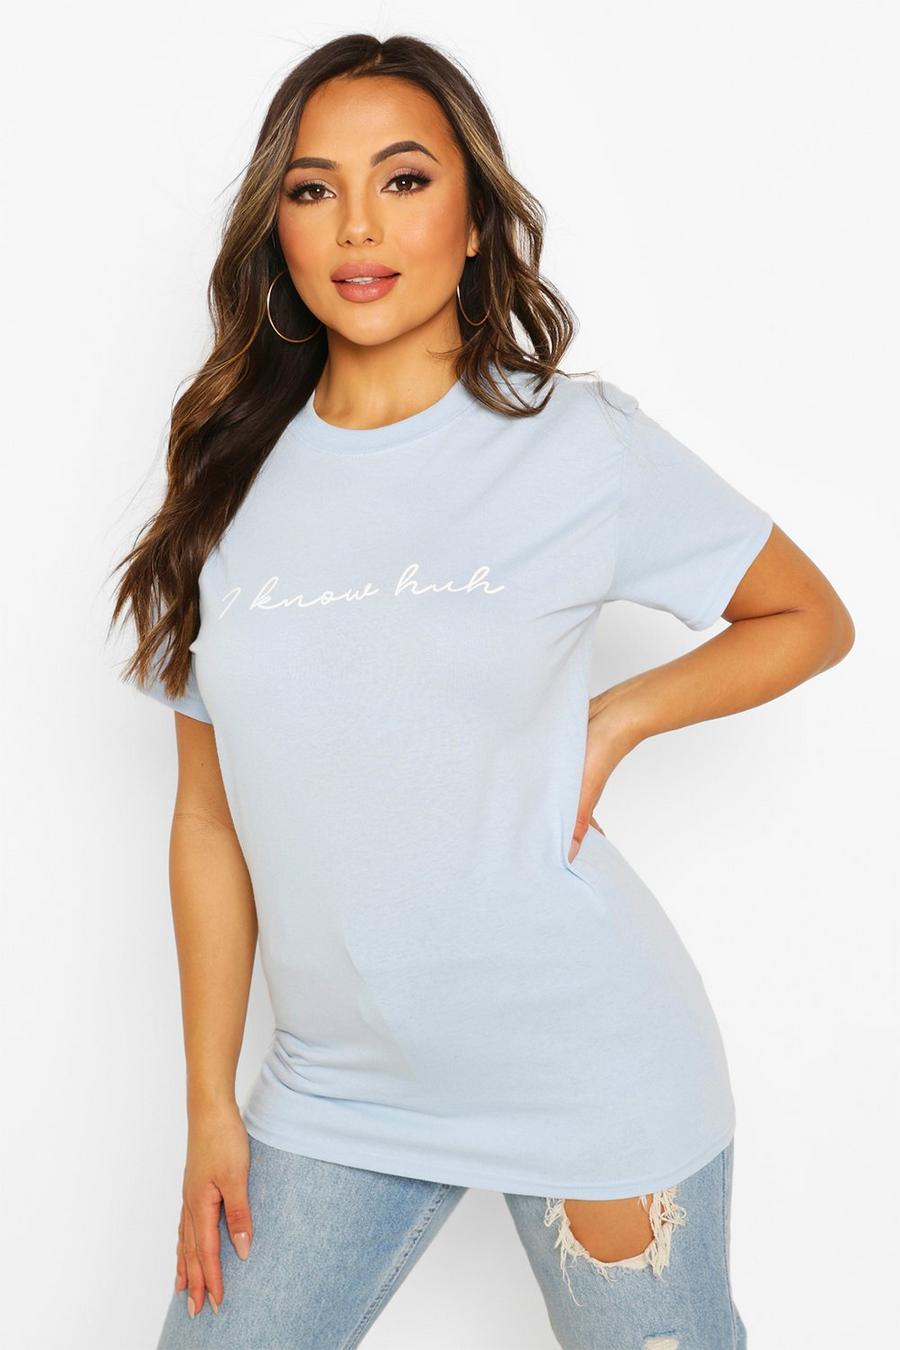 Light blue Petite 'I Know Huh' Graphic T-Shirt image number 1